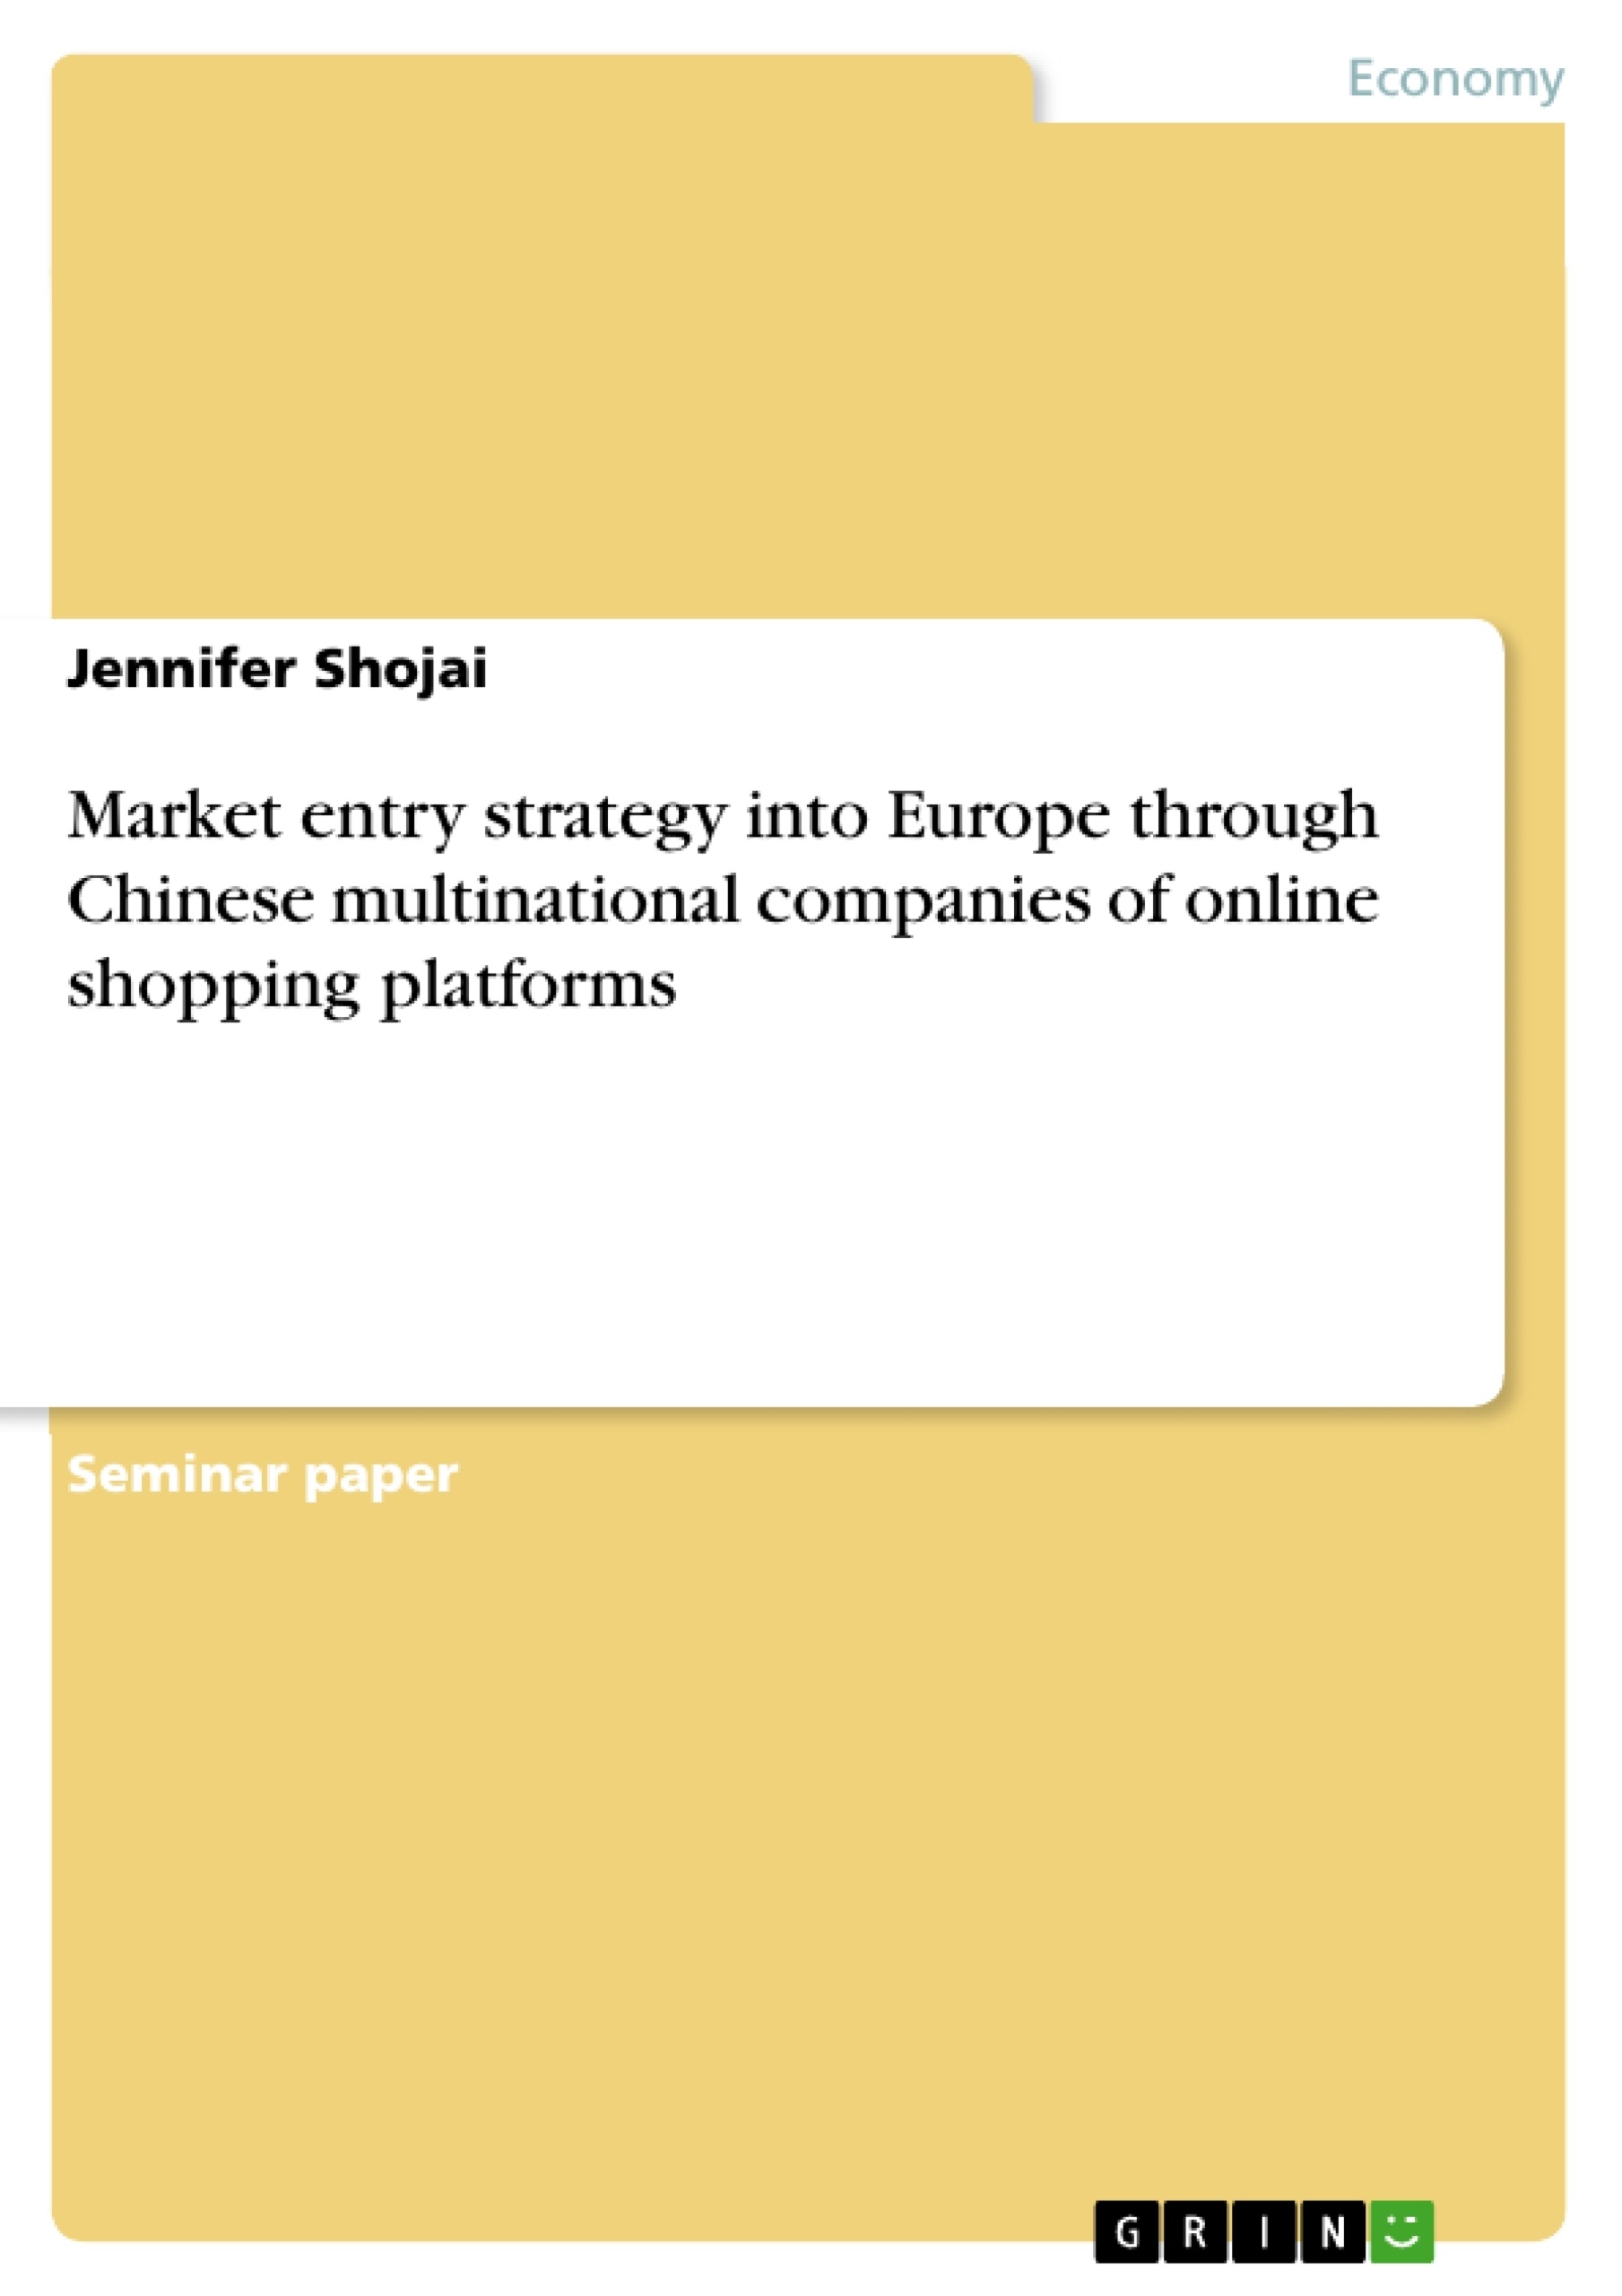 Title: Market entry strategy into Europe through Chinese multinational companies of online shopping platforms